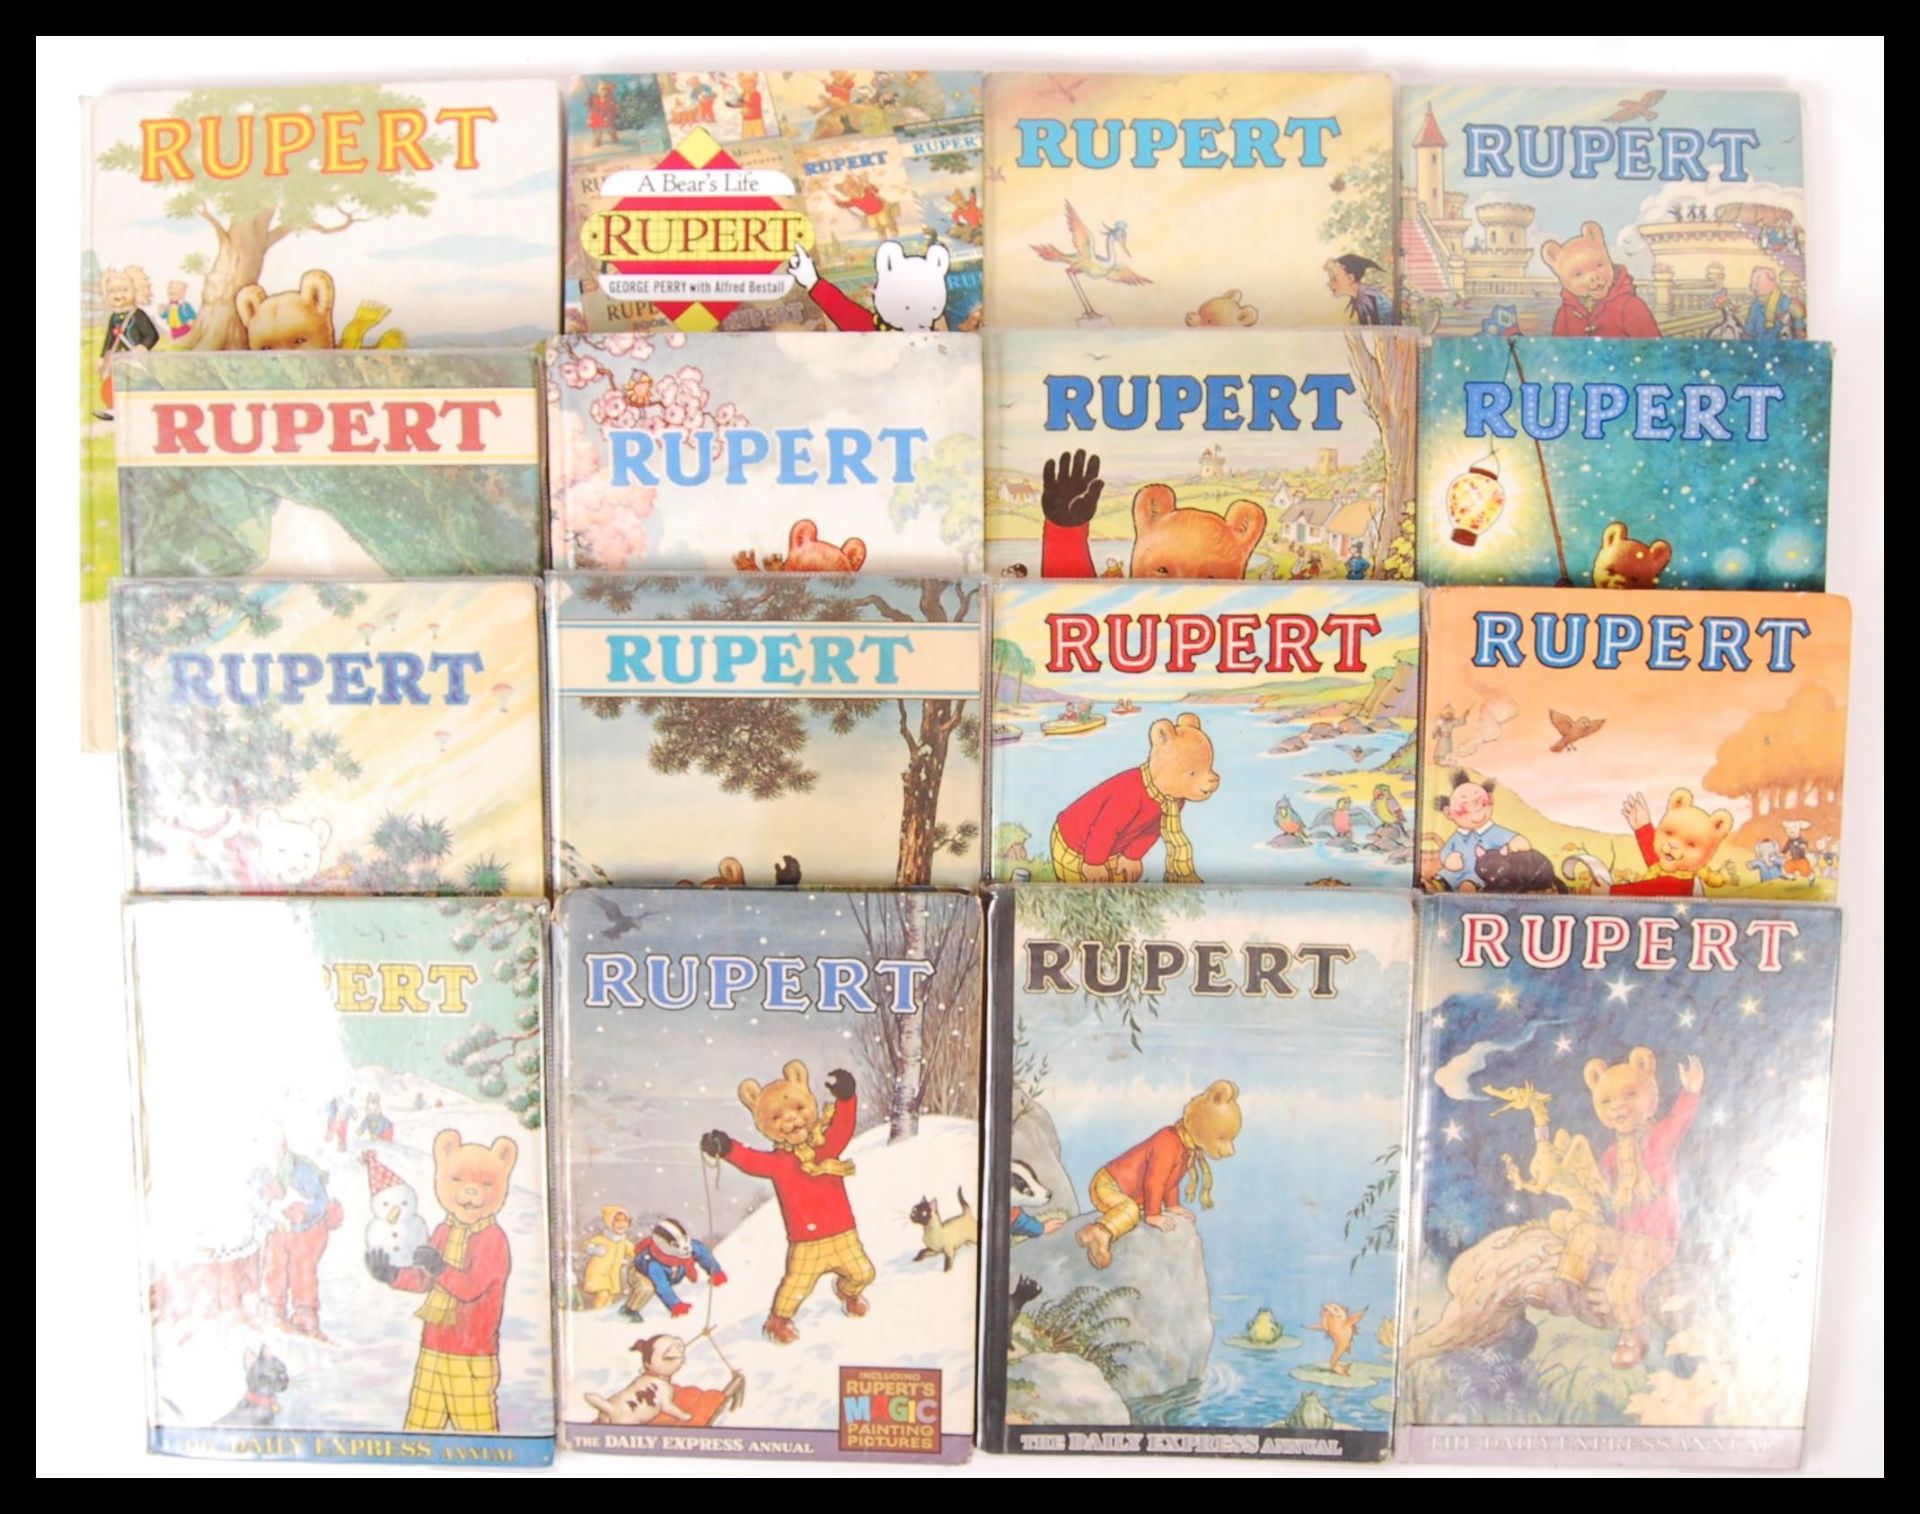 VINTAGE 1960'S / 70'S RUPERT HARDBACK DAILY EXPRESS ANNUALS